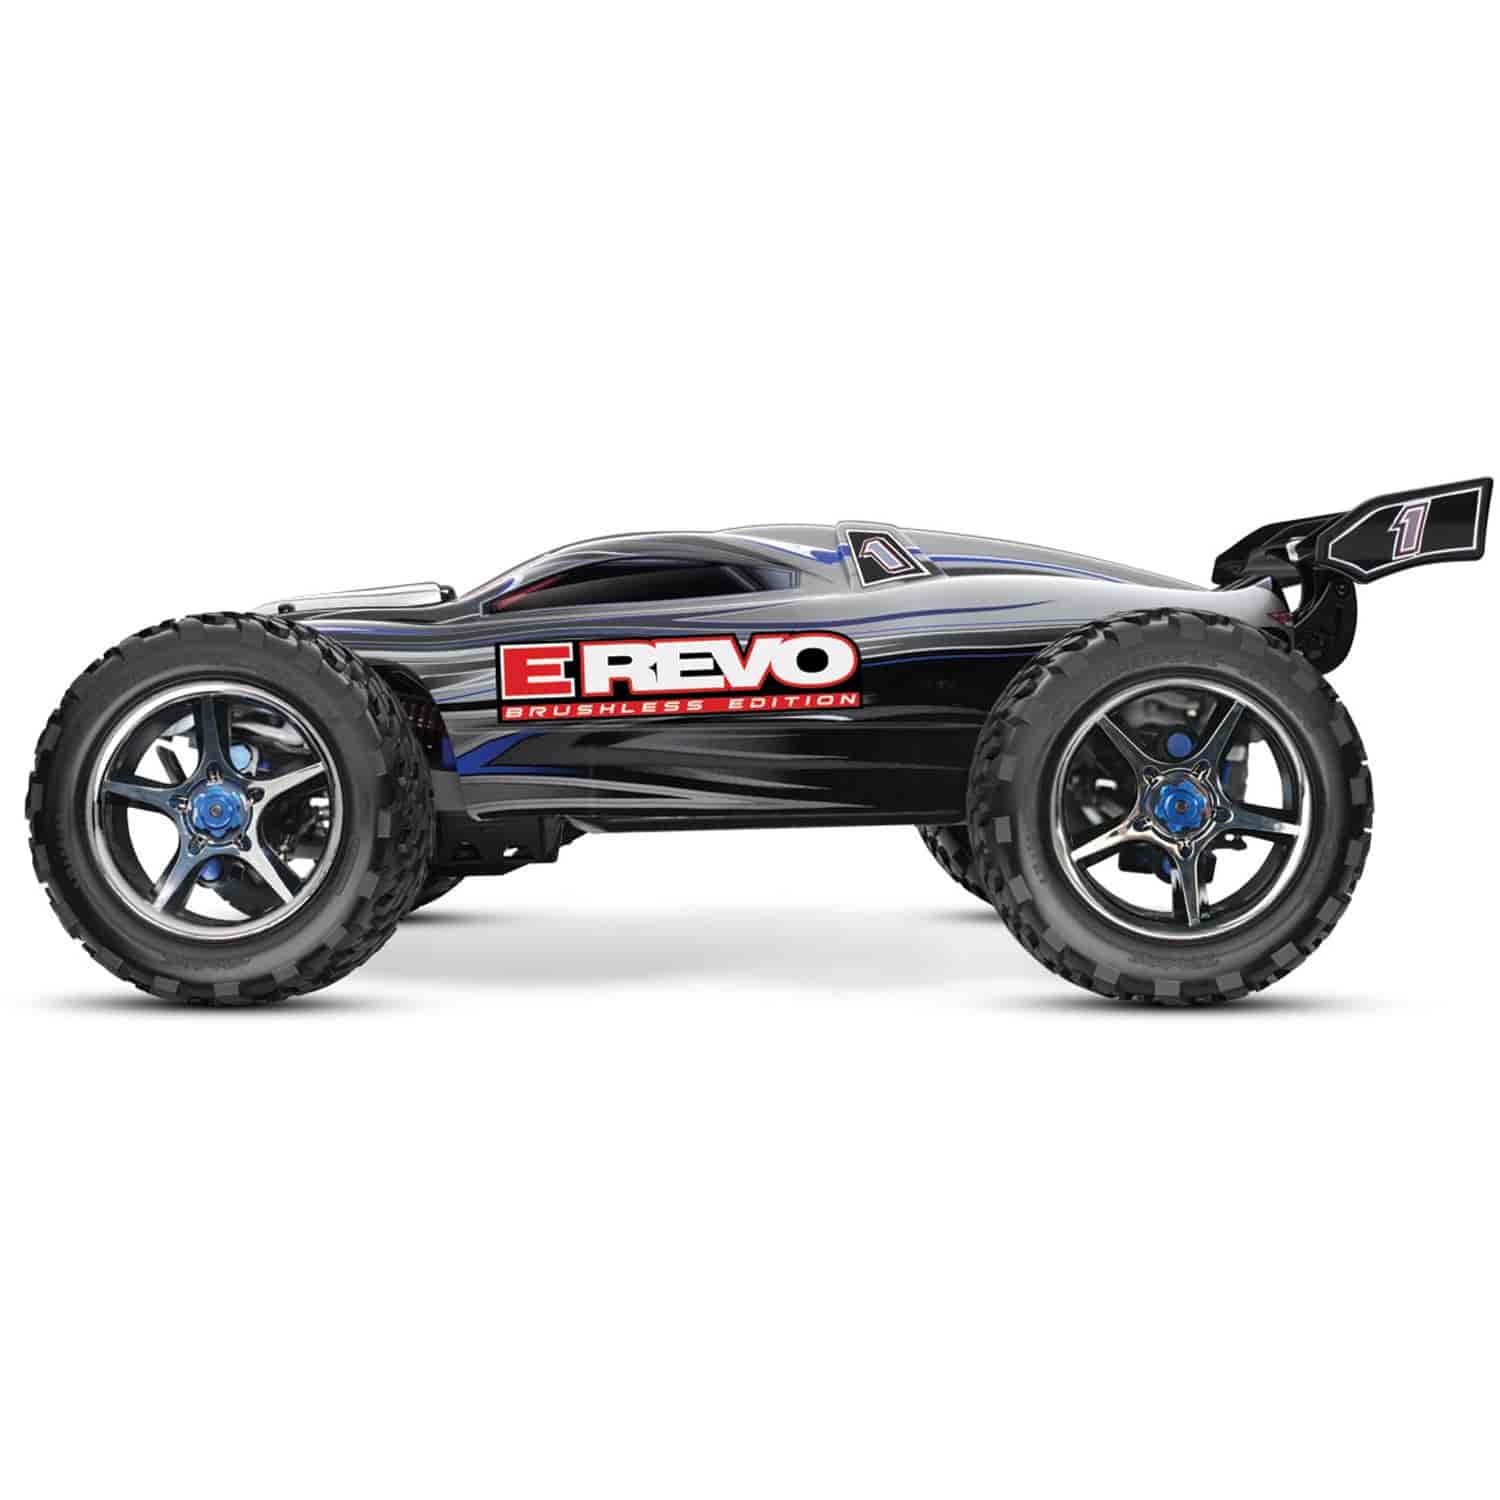 E-Revo Brushed Truck Fully Assembled, Ready-To-Race